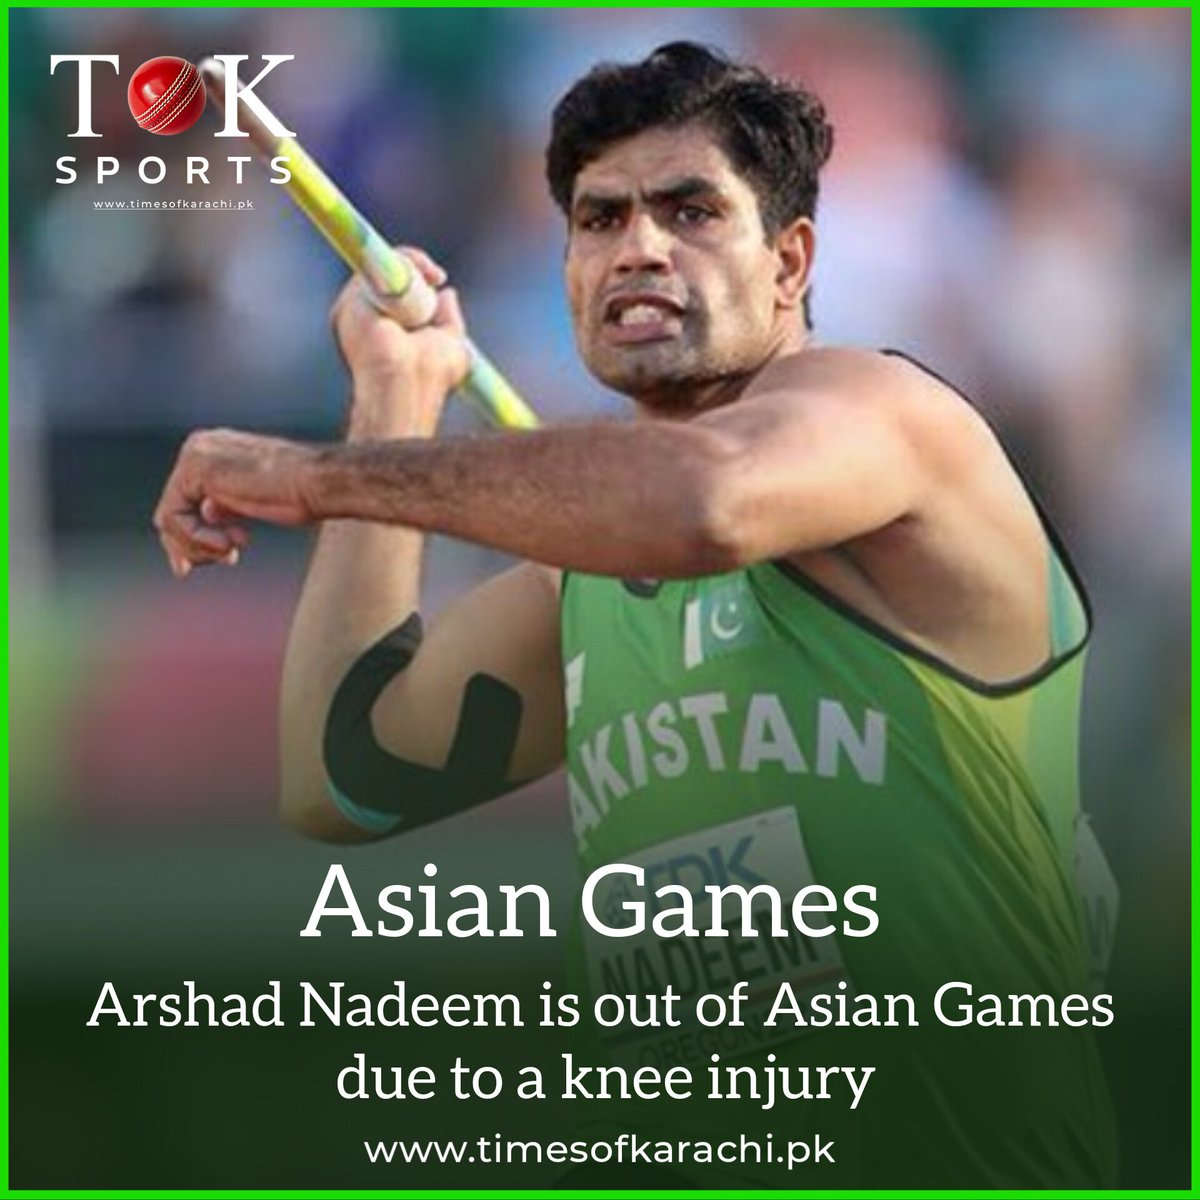 Pakistan suffers a major setback as Arshad Nadeem is forced to withdraw from Asian Games due to a knee injury.

#TOKSports #ArshadNadeem #AsianGames2023